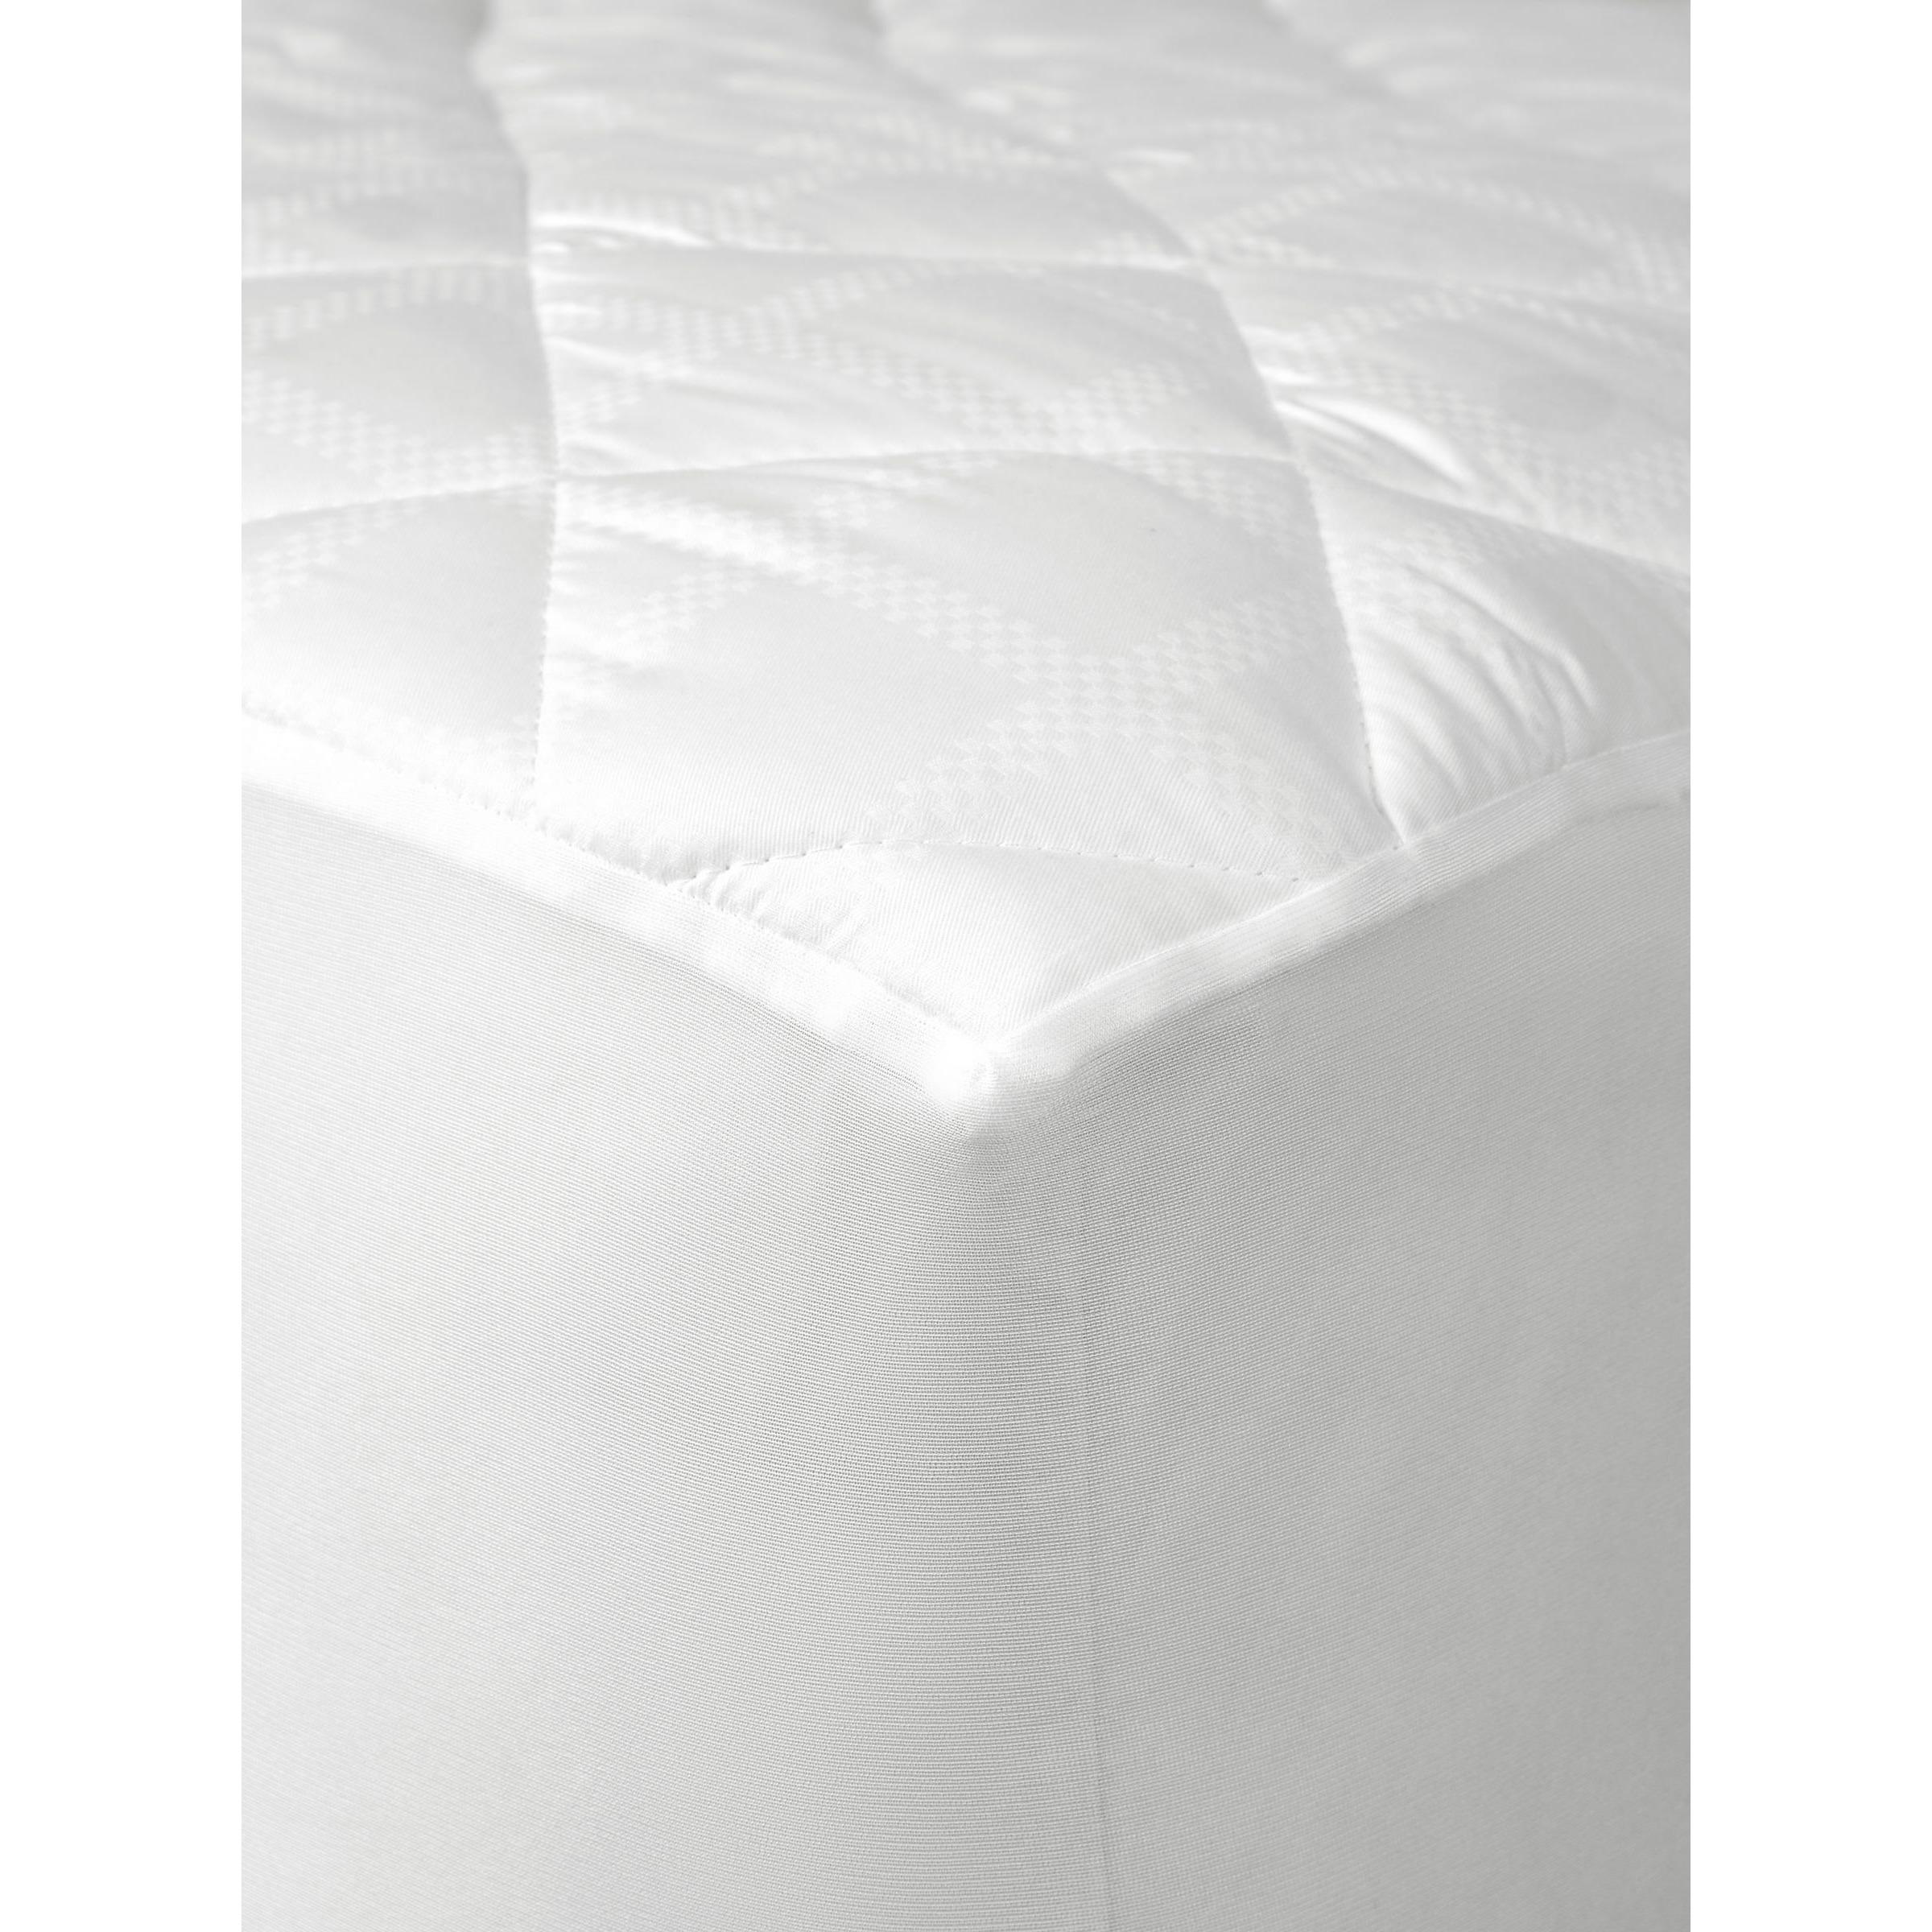 John Lewis Active Anti-Allergy with HeiQ Allergen Tech* Mattress Protector - image 1